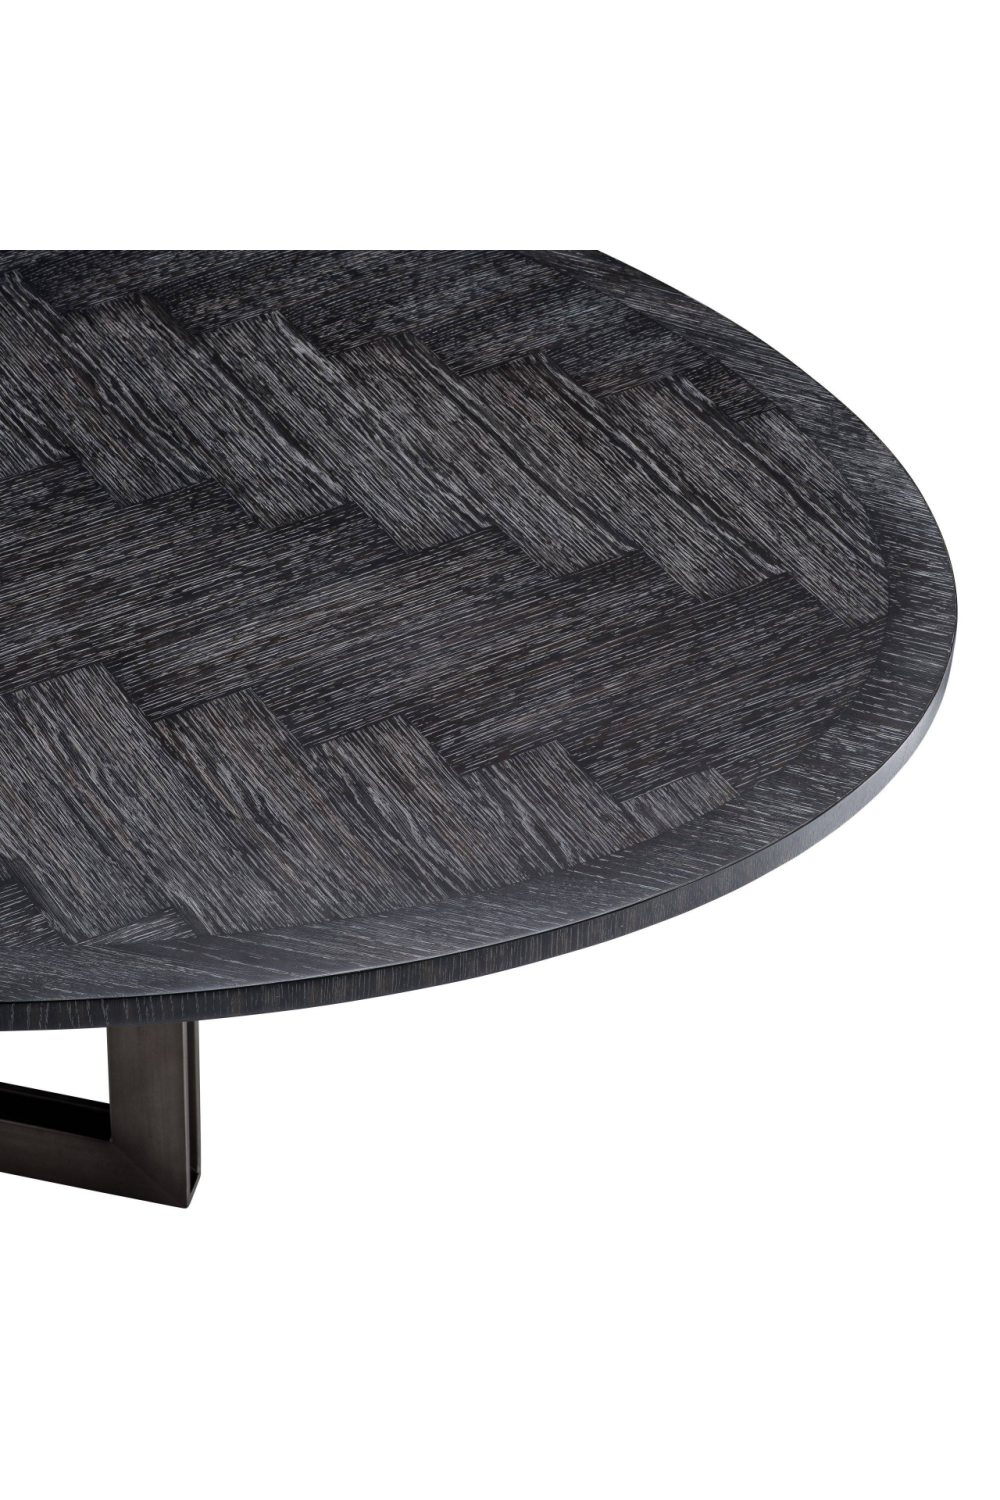 Oval Charcoal Dining Table | Eichholtz Melchior | OROA